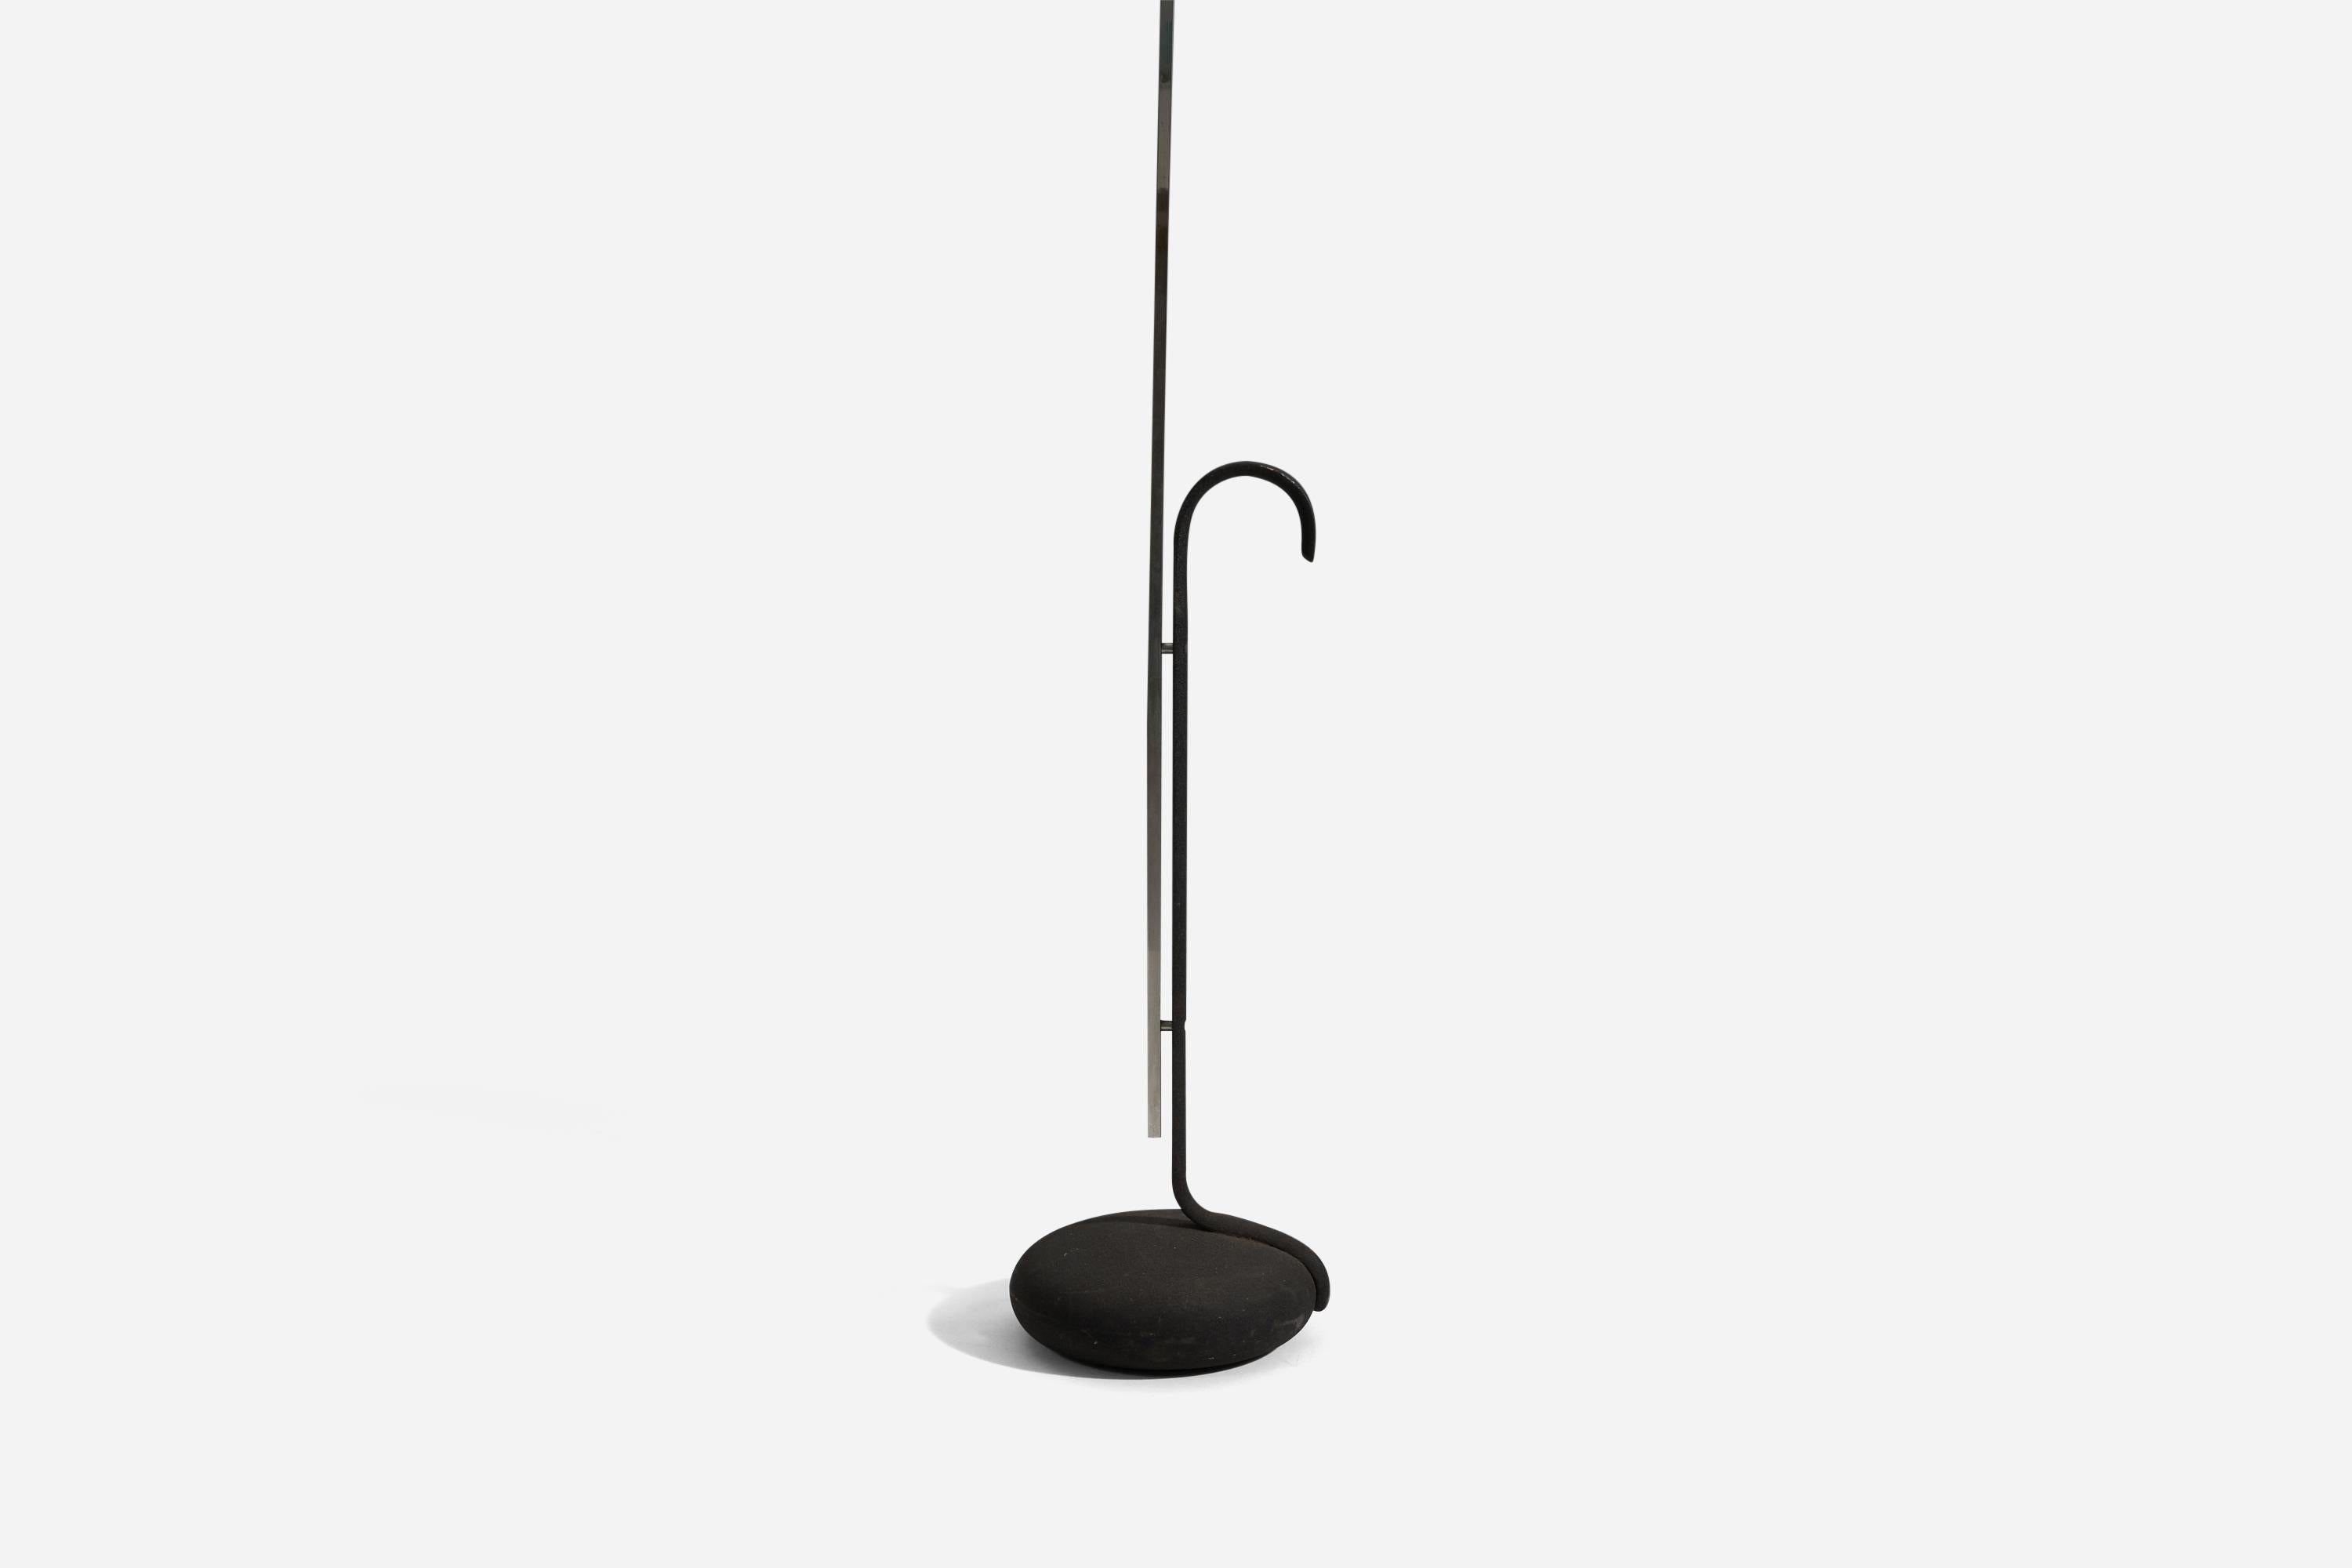 Gino Sarfatti, Floor Lamp, Perspex, Cast Iron, Metal, Chrome Arteluce Italy 1973 In Good Condition For Sale In High Point, NC